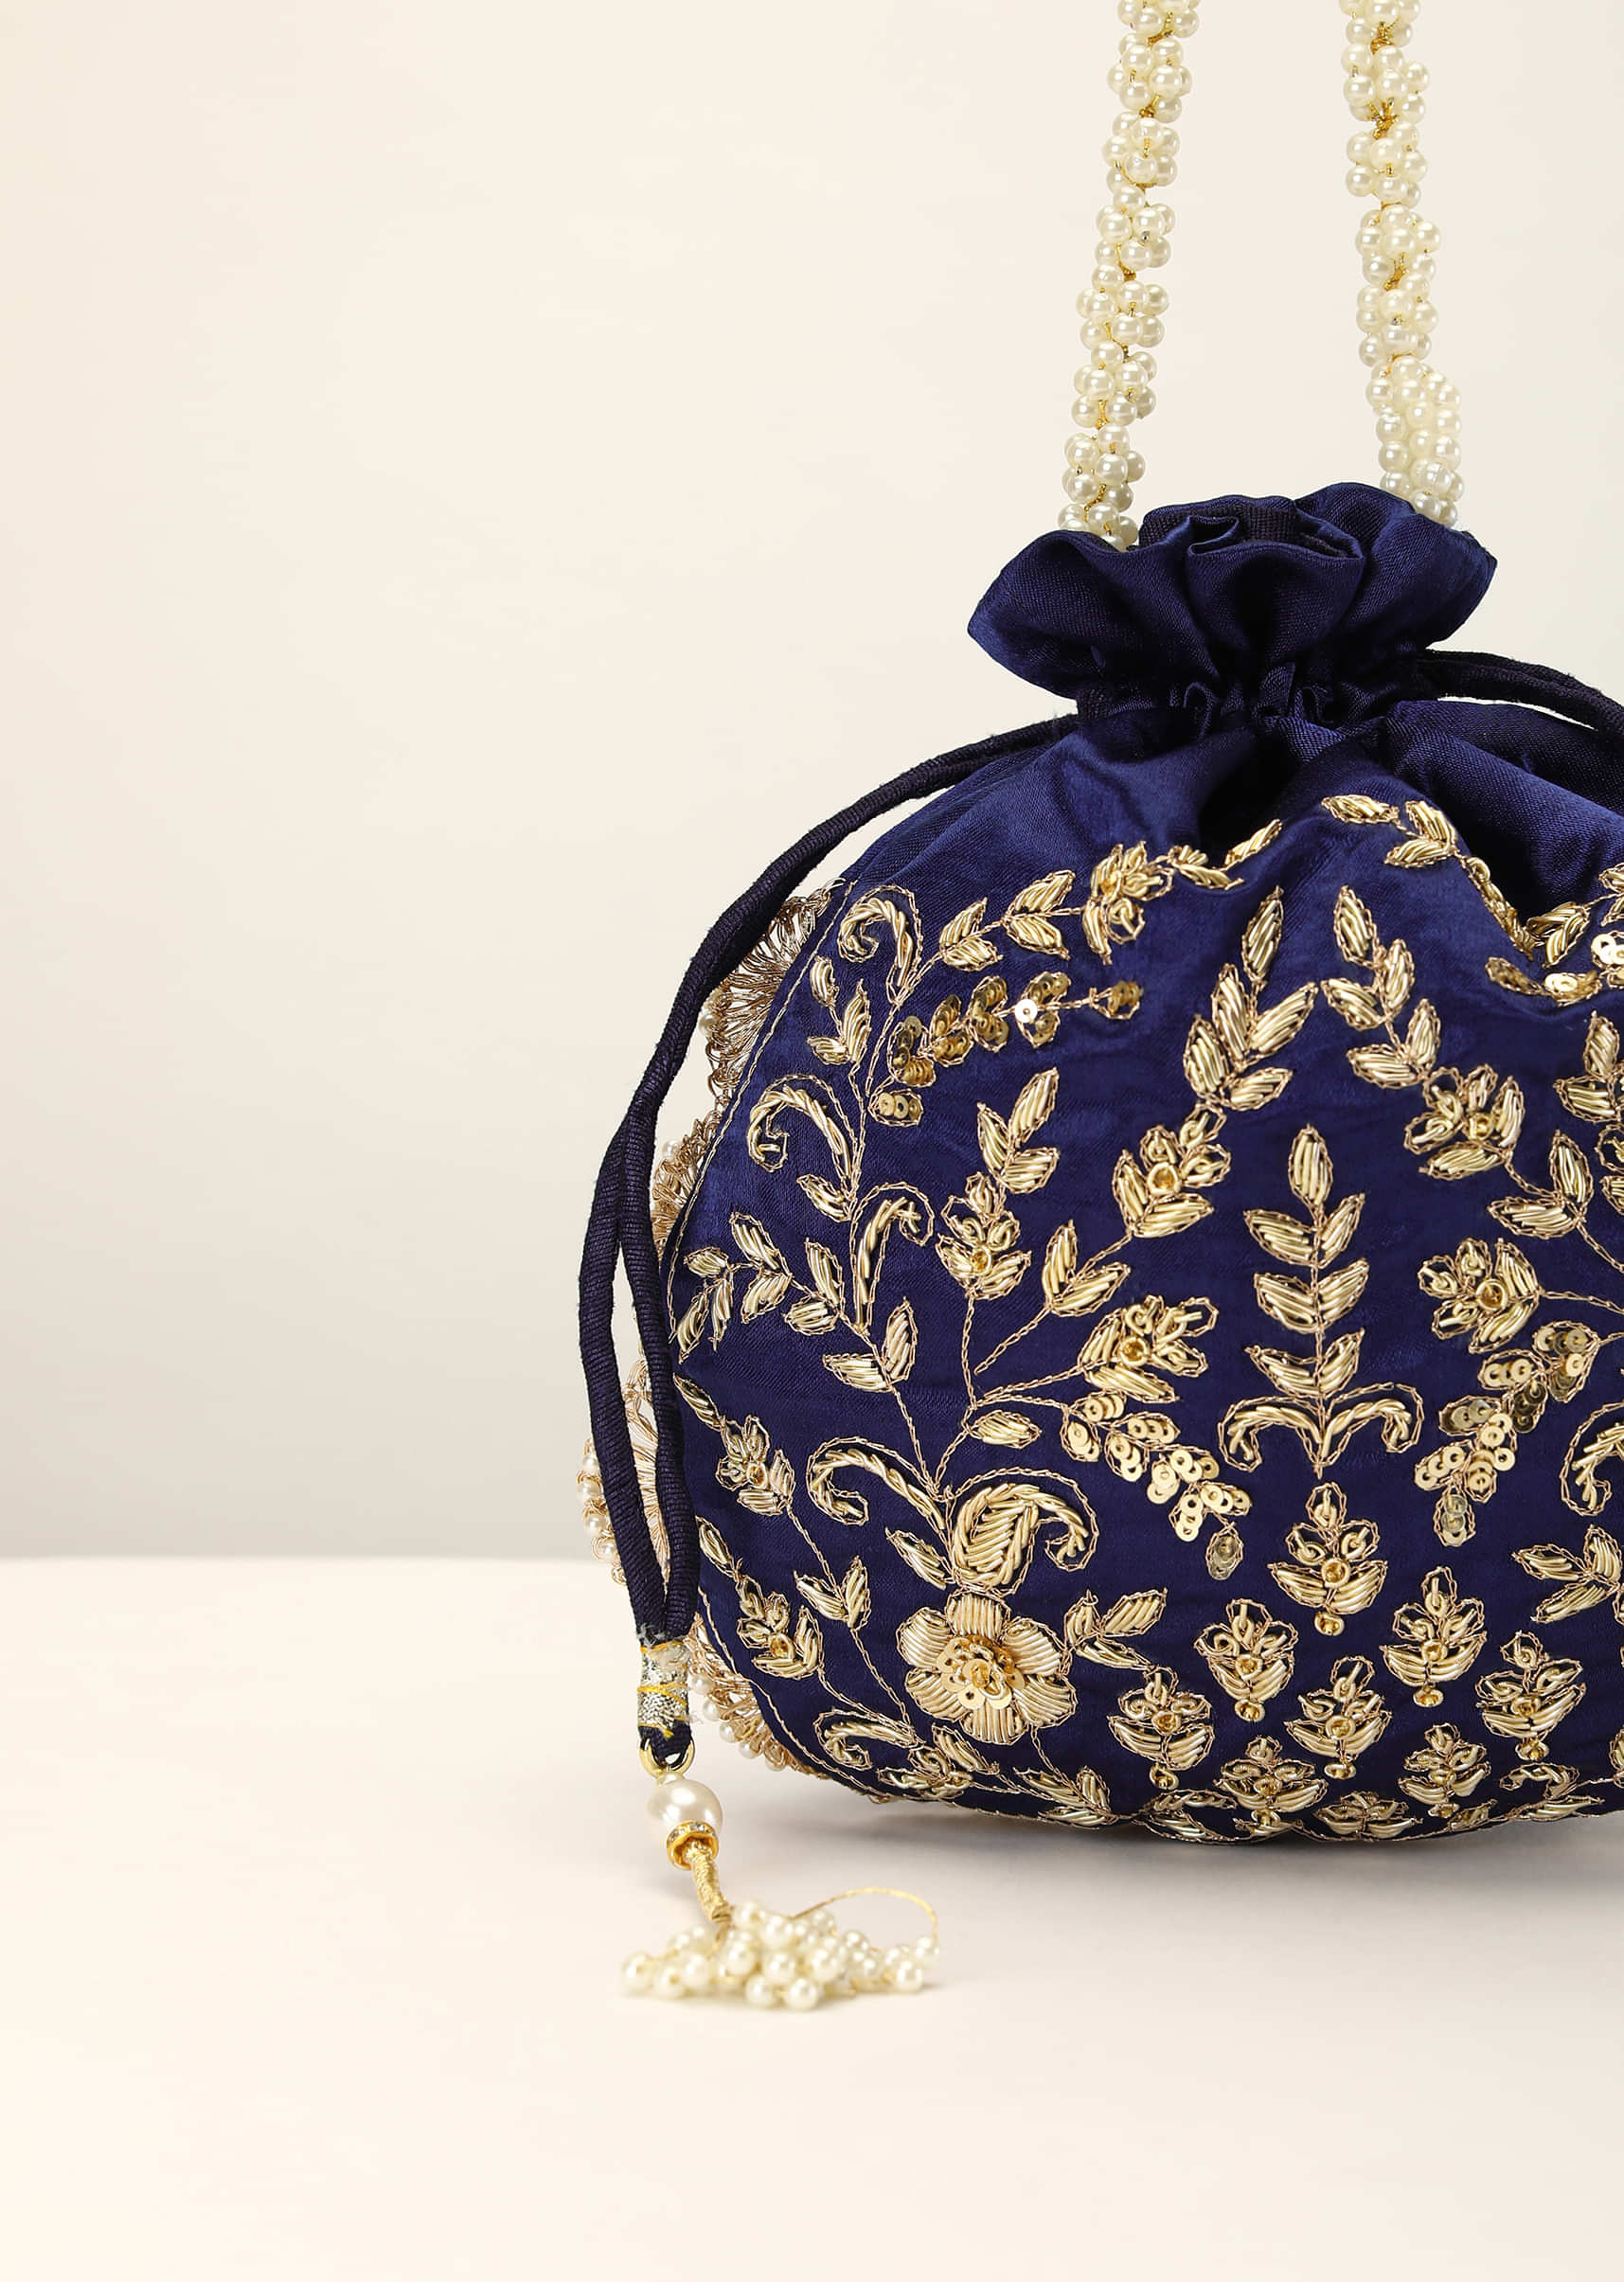 Royal Blue Potli In Satin With Hand Embroidery Detailing Using Zardosi Work In Floral Design All Over